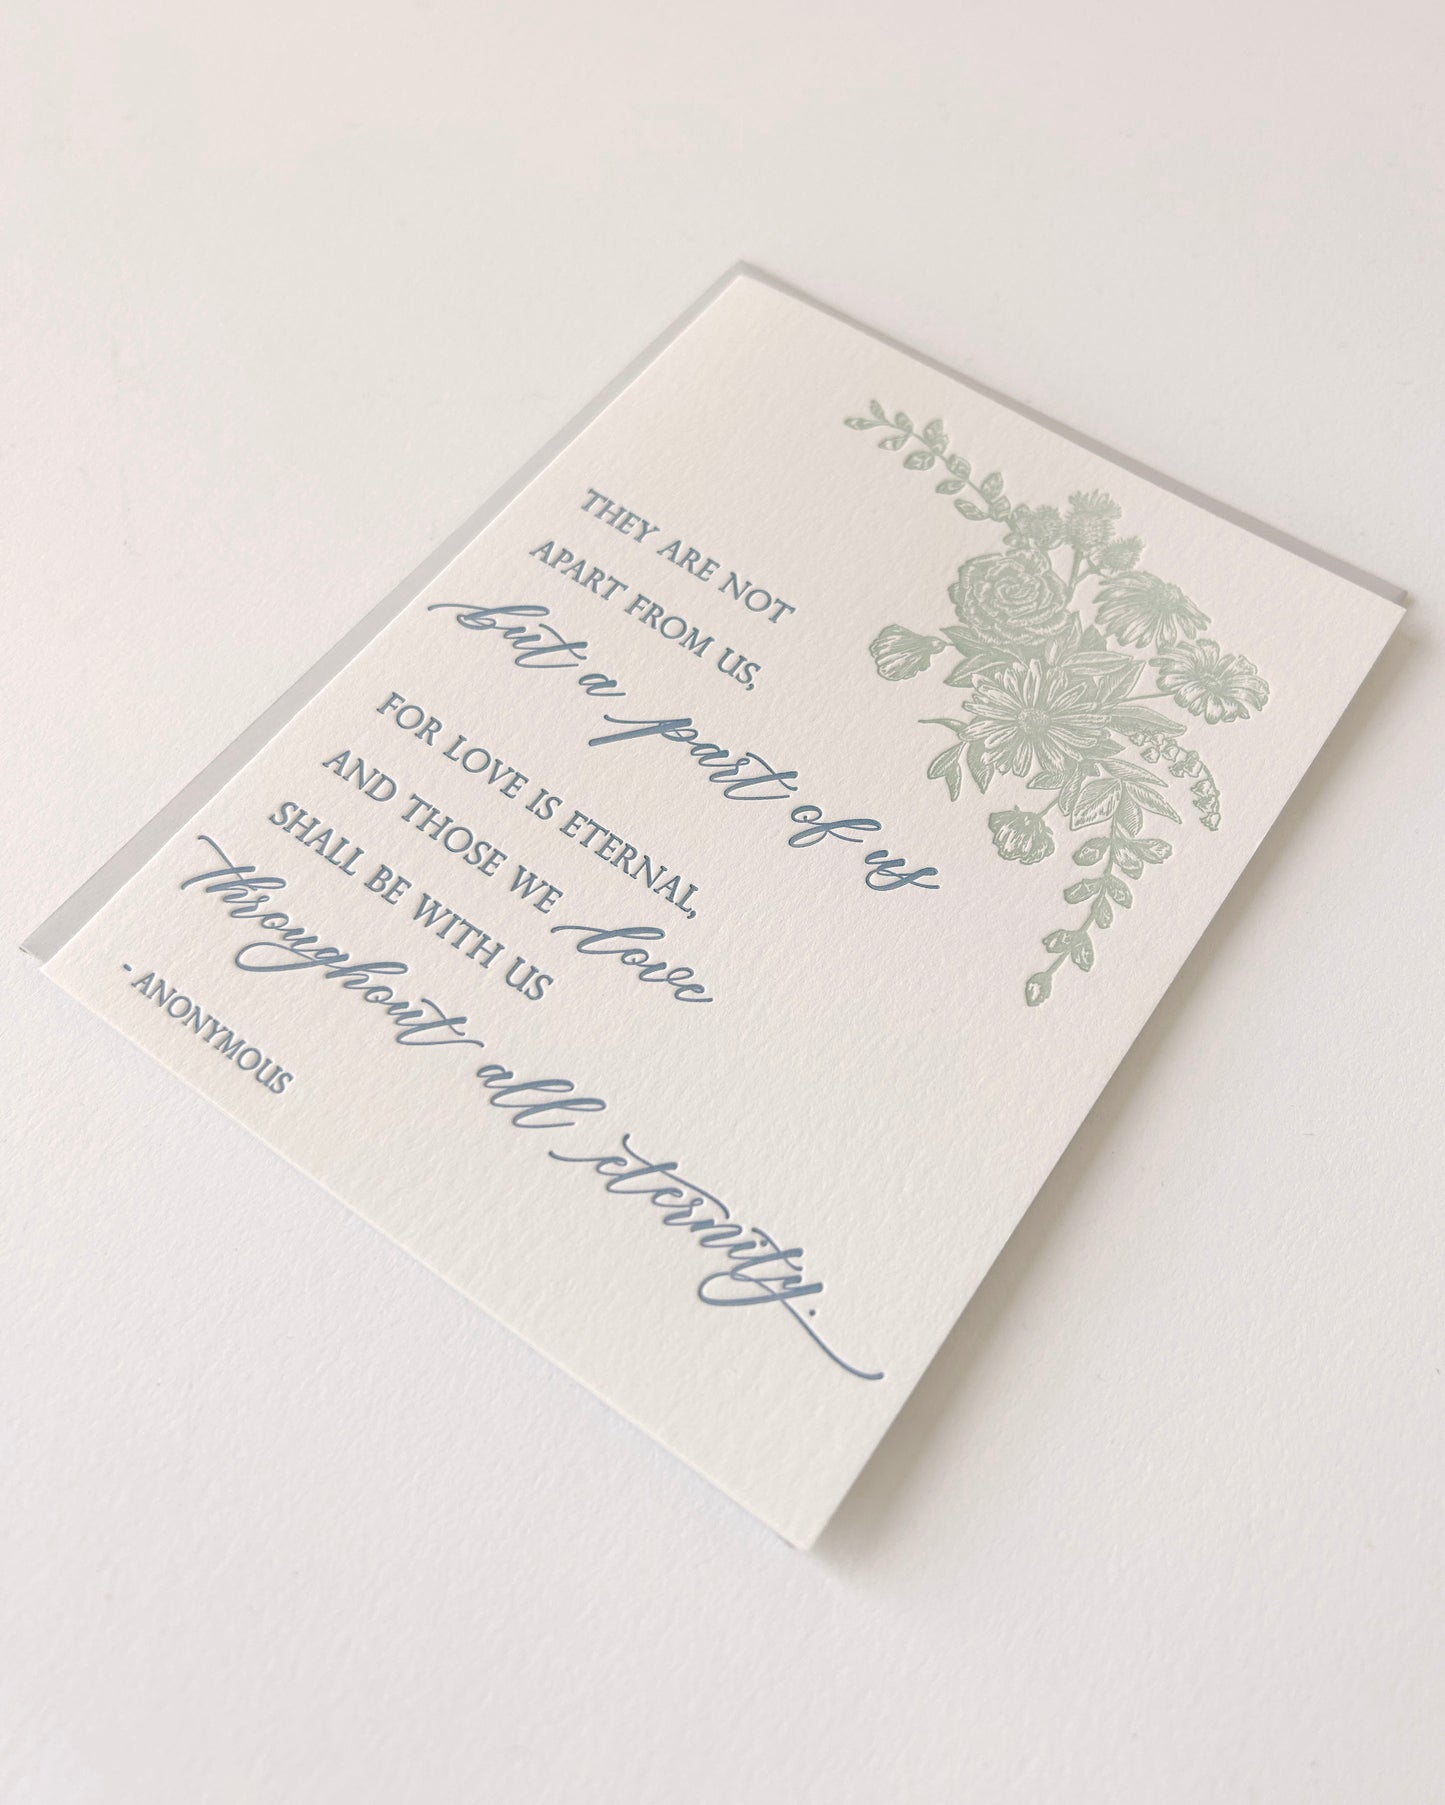 Letterpress sympathy card with florals that says "They are not apart from us, but a part of us for love is eternal, and those we love shall be with us throughout all eternity.- Anonymous"" by Rust Belt Love